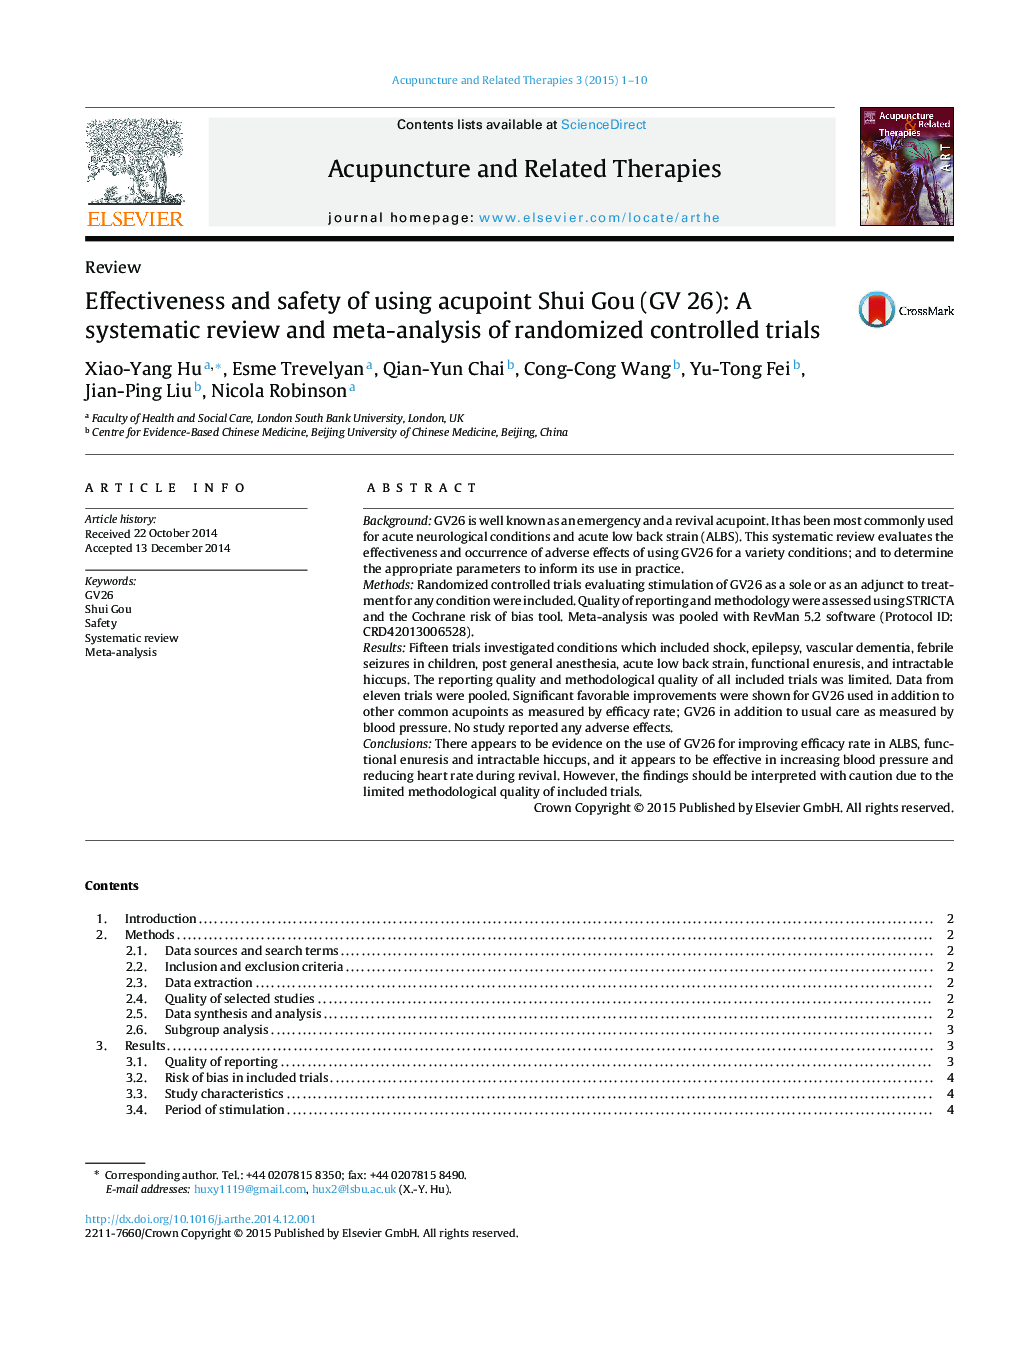 Effectiveness and safety of using acupoint Shui Gou (GV 26): A systematic review and meta-analysis of randomized controlled trials